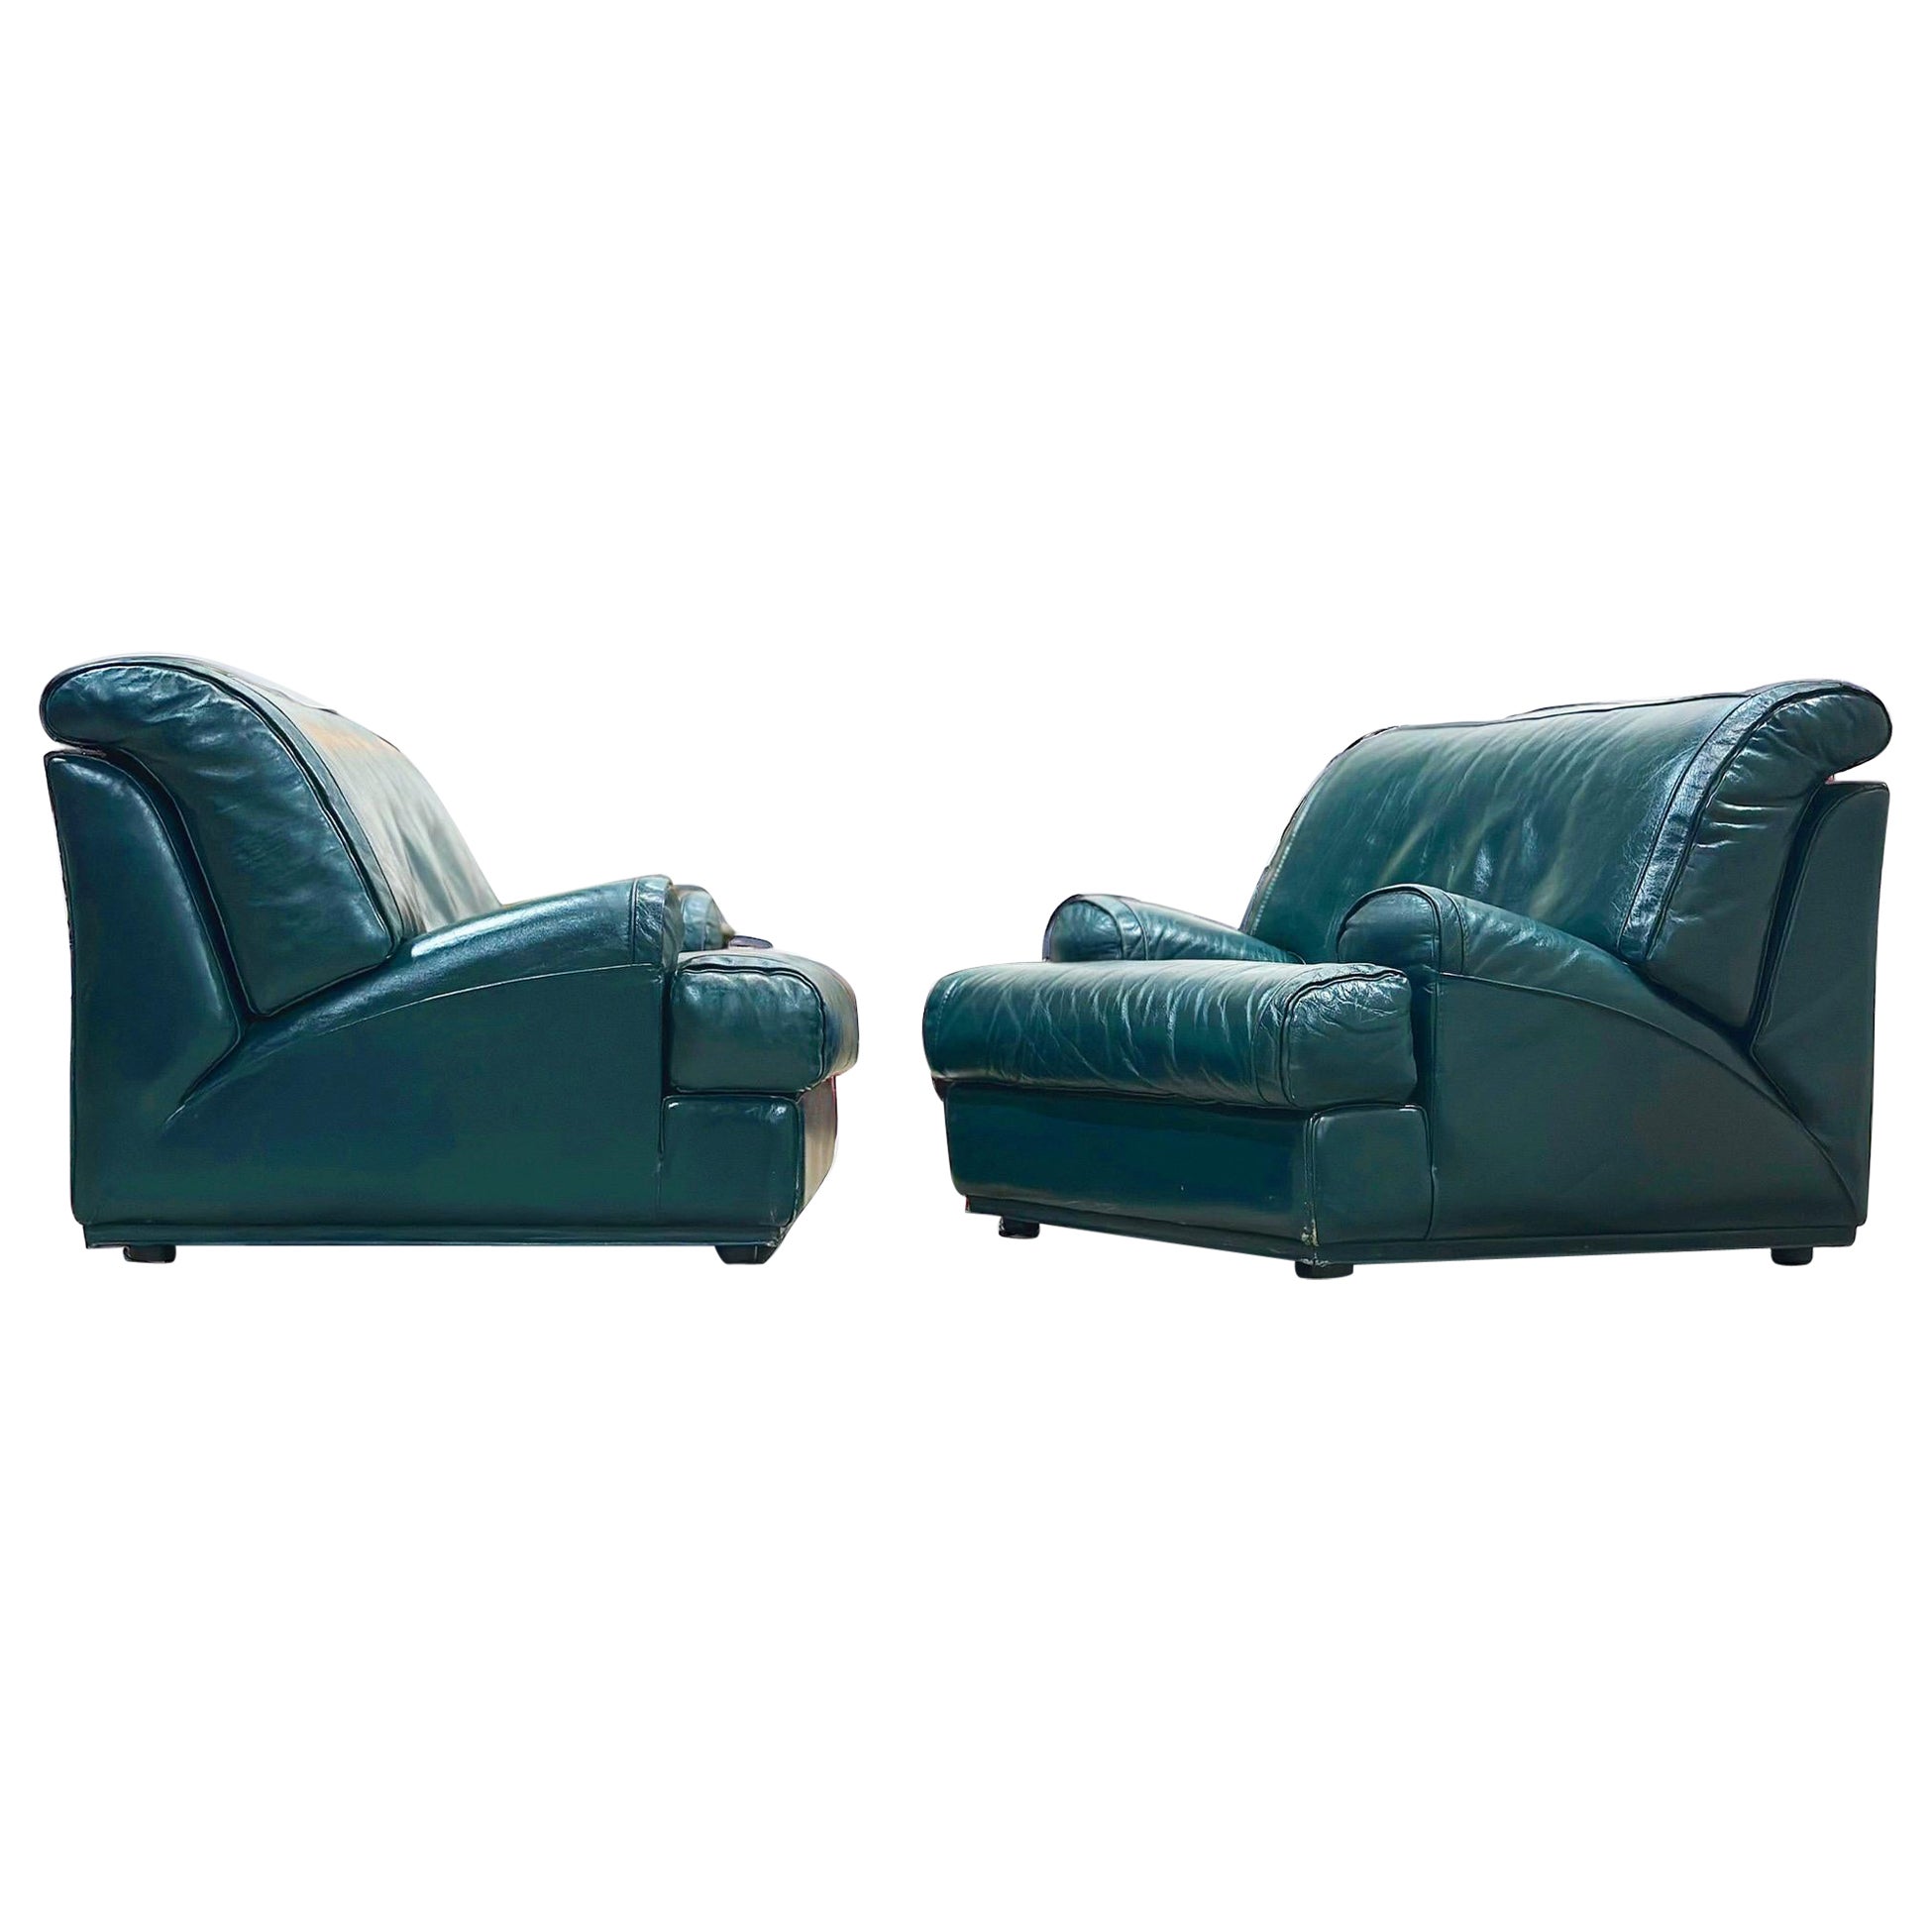 Pair Vintage Roche Bobois Teal Leather Club Lounge Chairs - Streamline Moderne